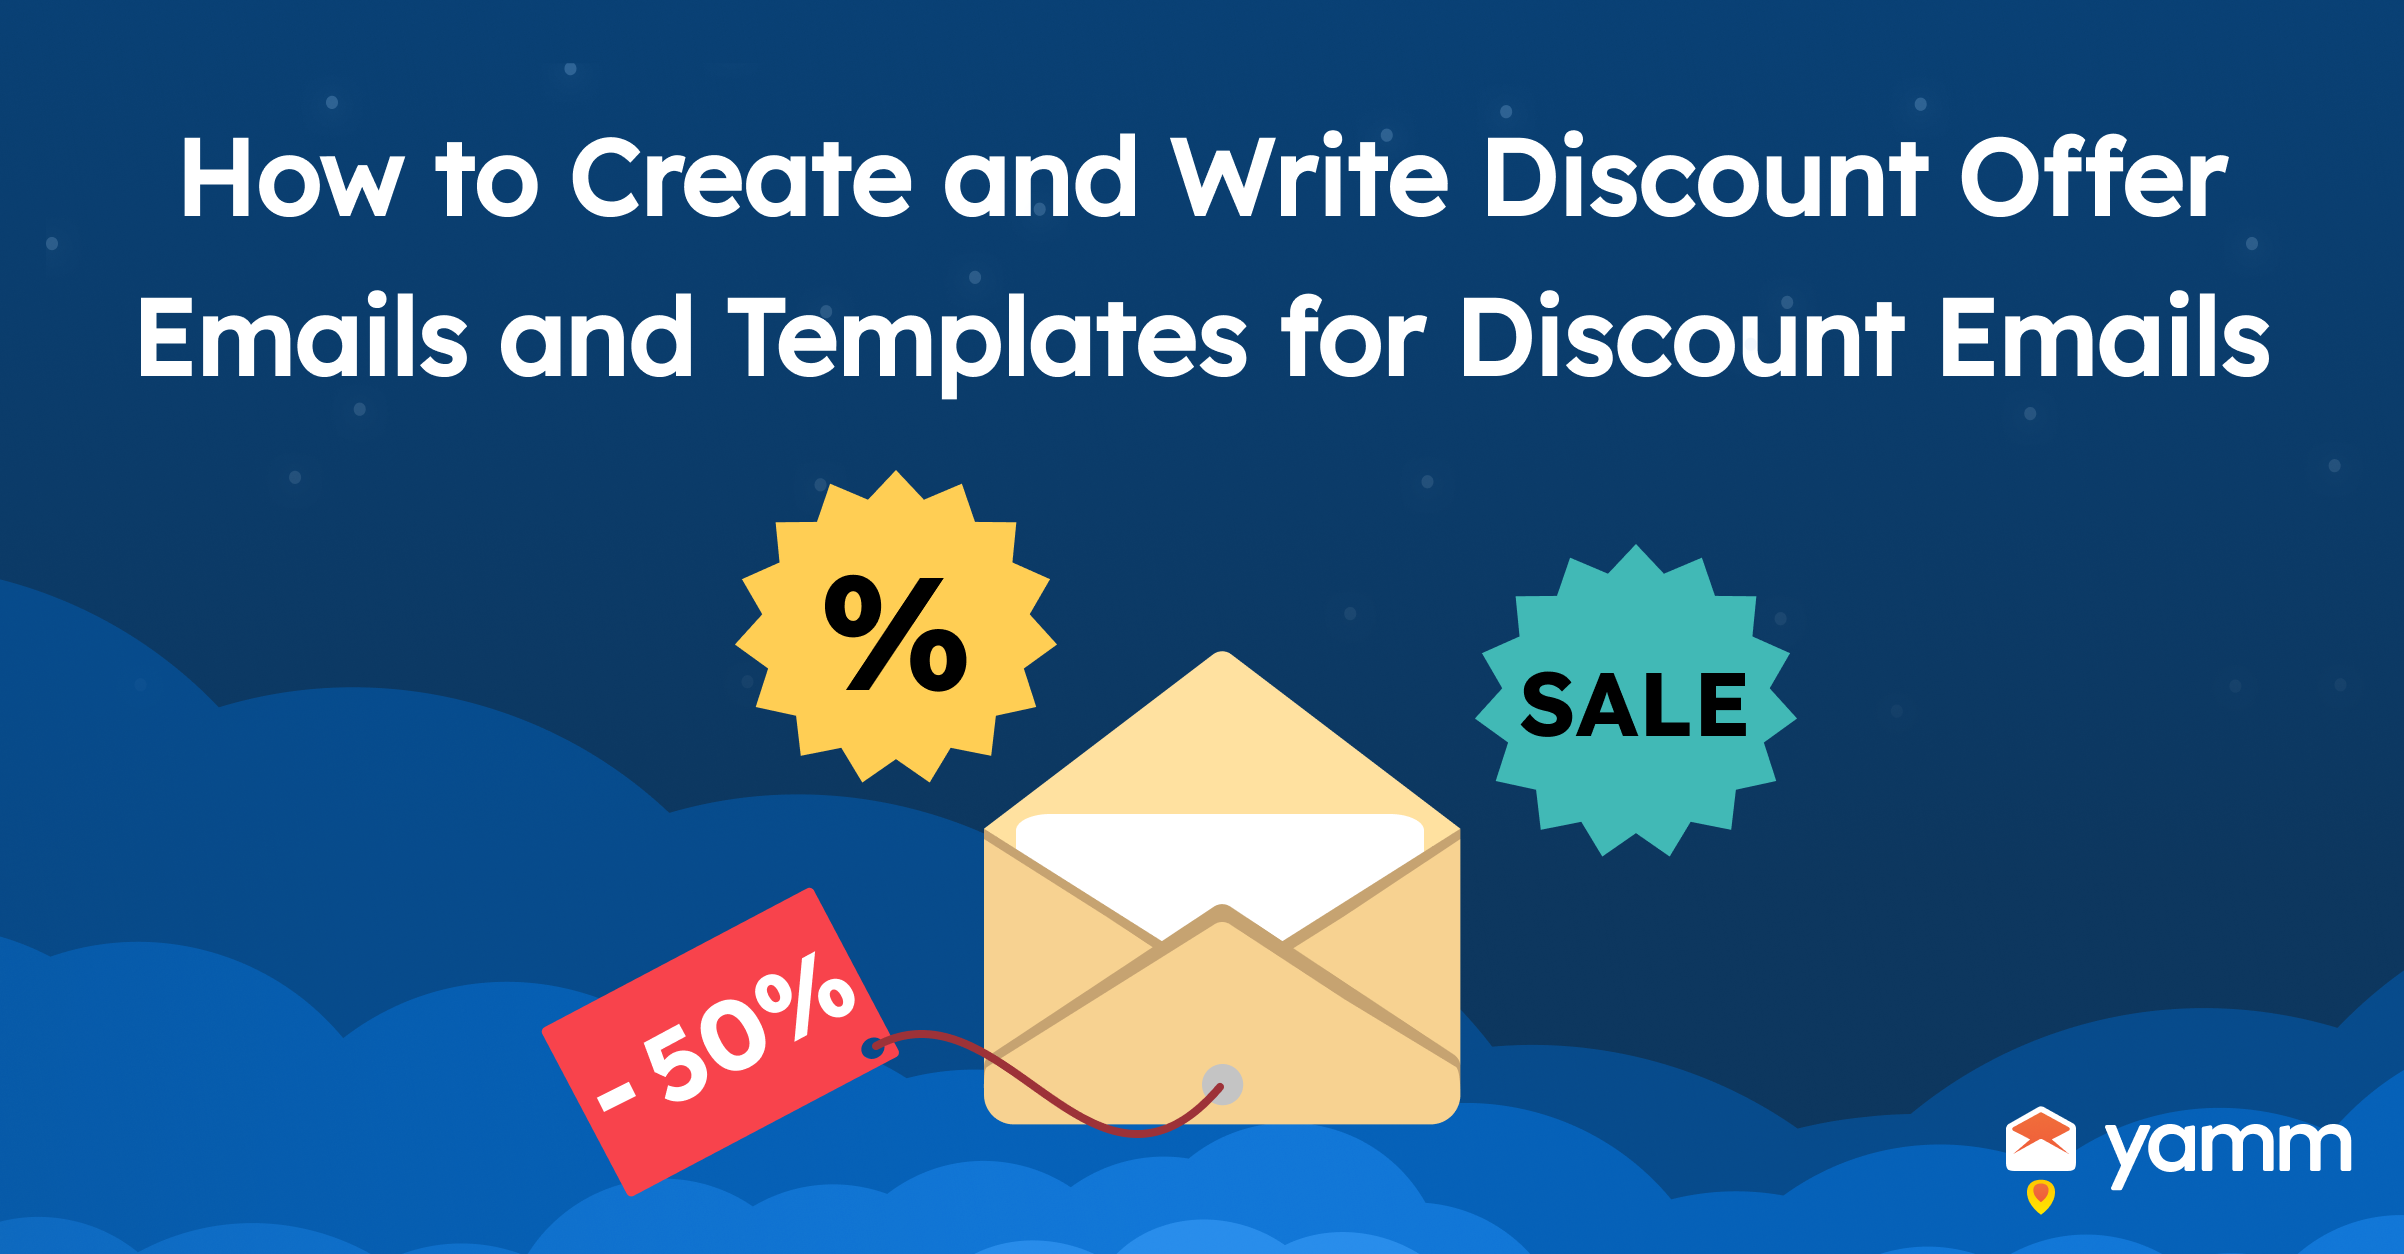 How to Create and Write Discount Offer Emails and Templates for Discount Emails